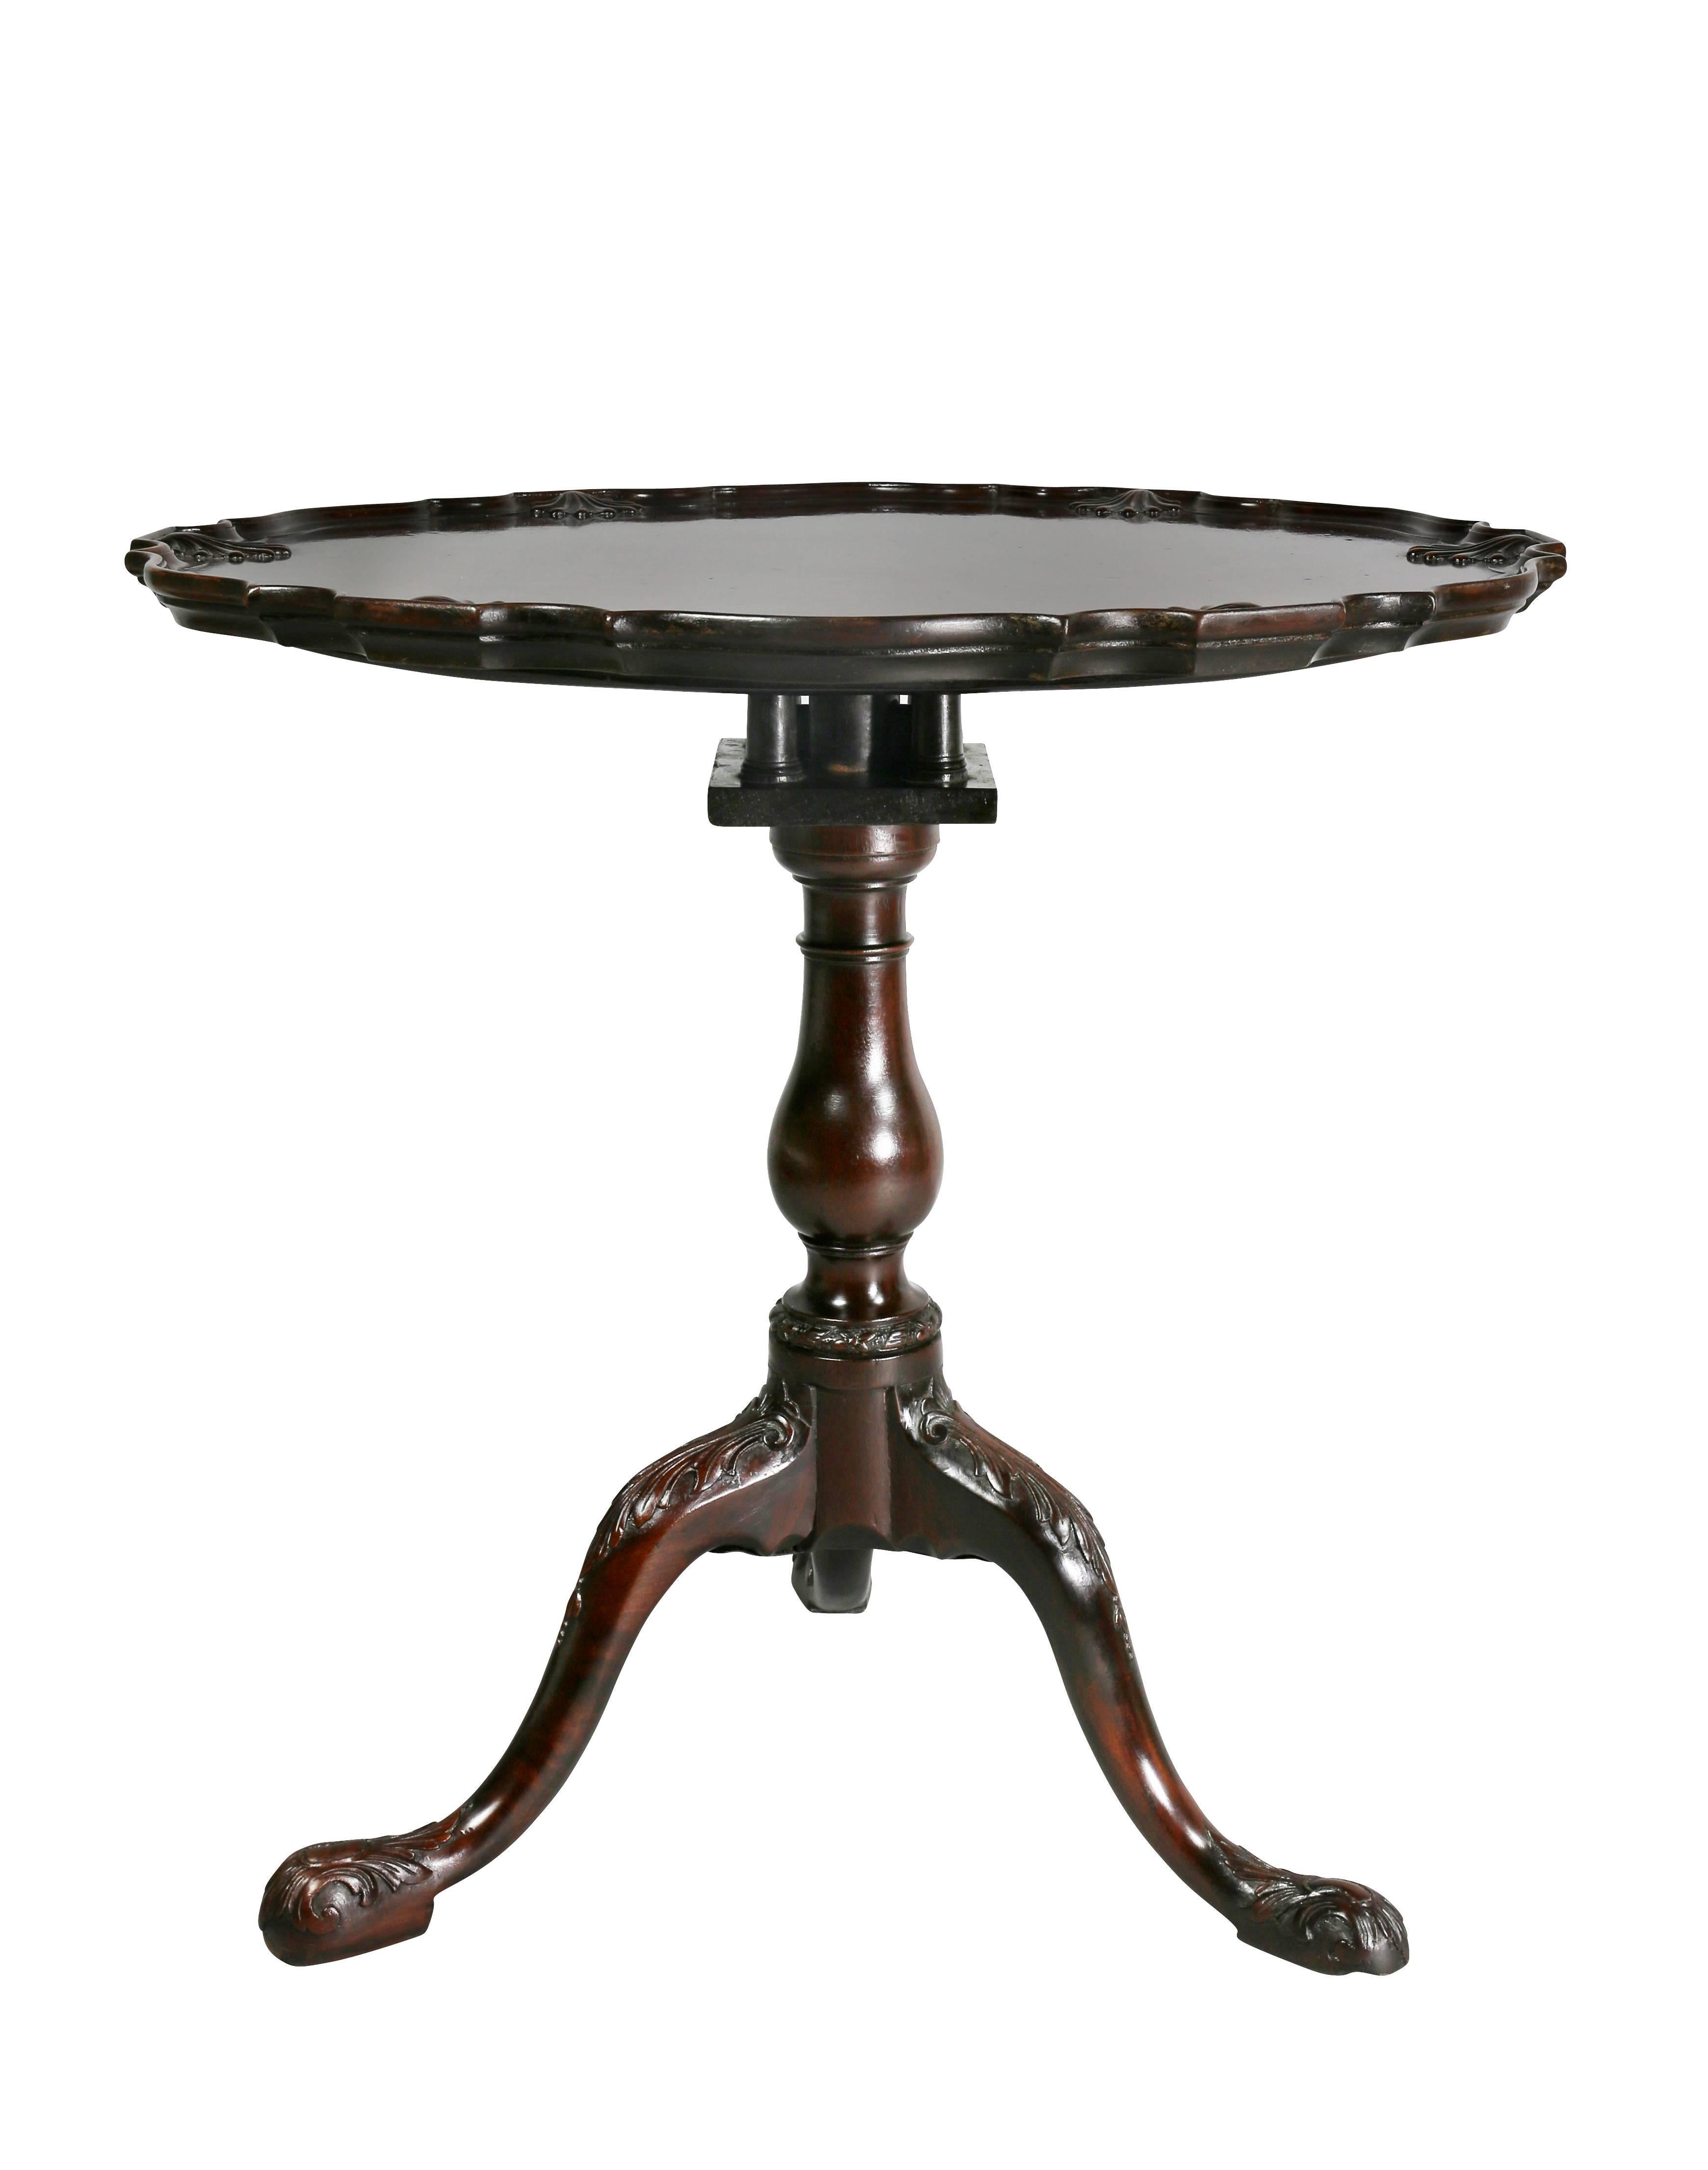 Circular tilt top with shell carved edge, birdcage below and turned support joining three cabriole legs with carved knees, carved pad feet.

Folded dimensions: 44.25" H x 29.63" W x 7" D.